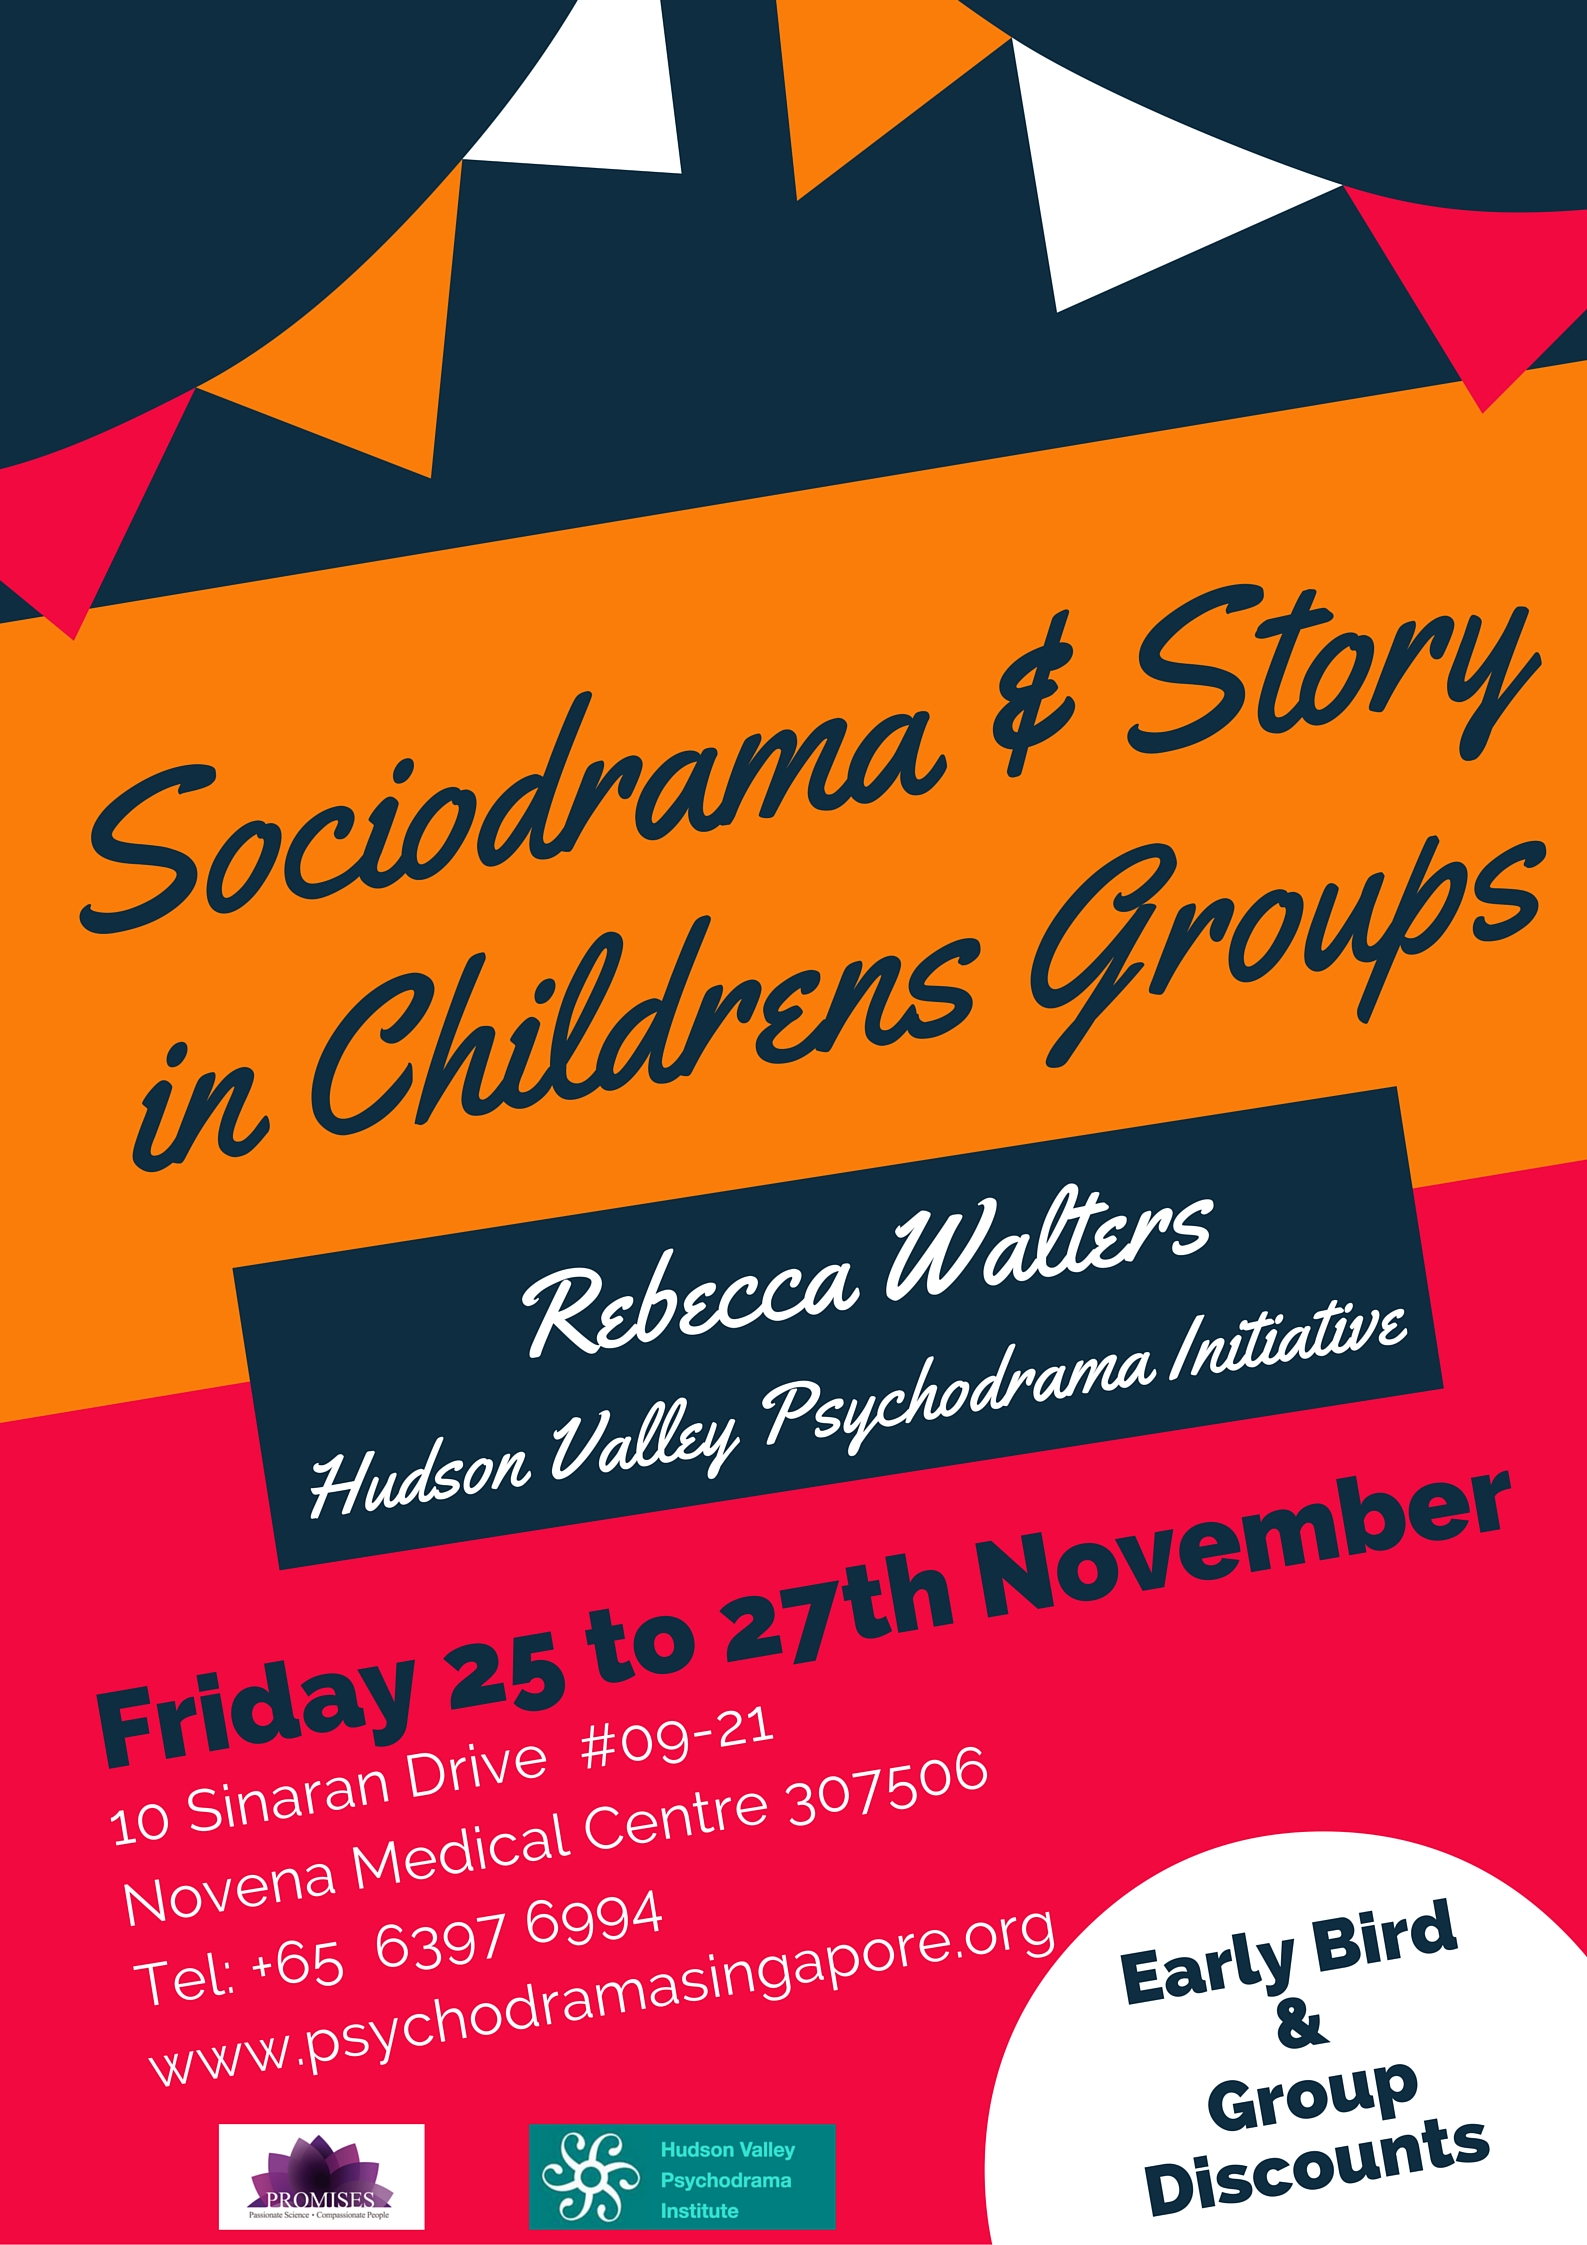 Sociodrama and Story in Childrens Groups by Rebecca Walters